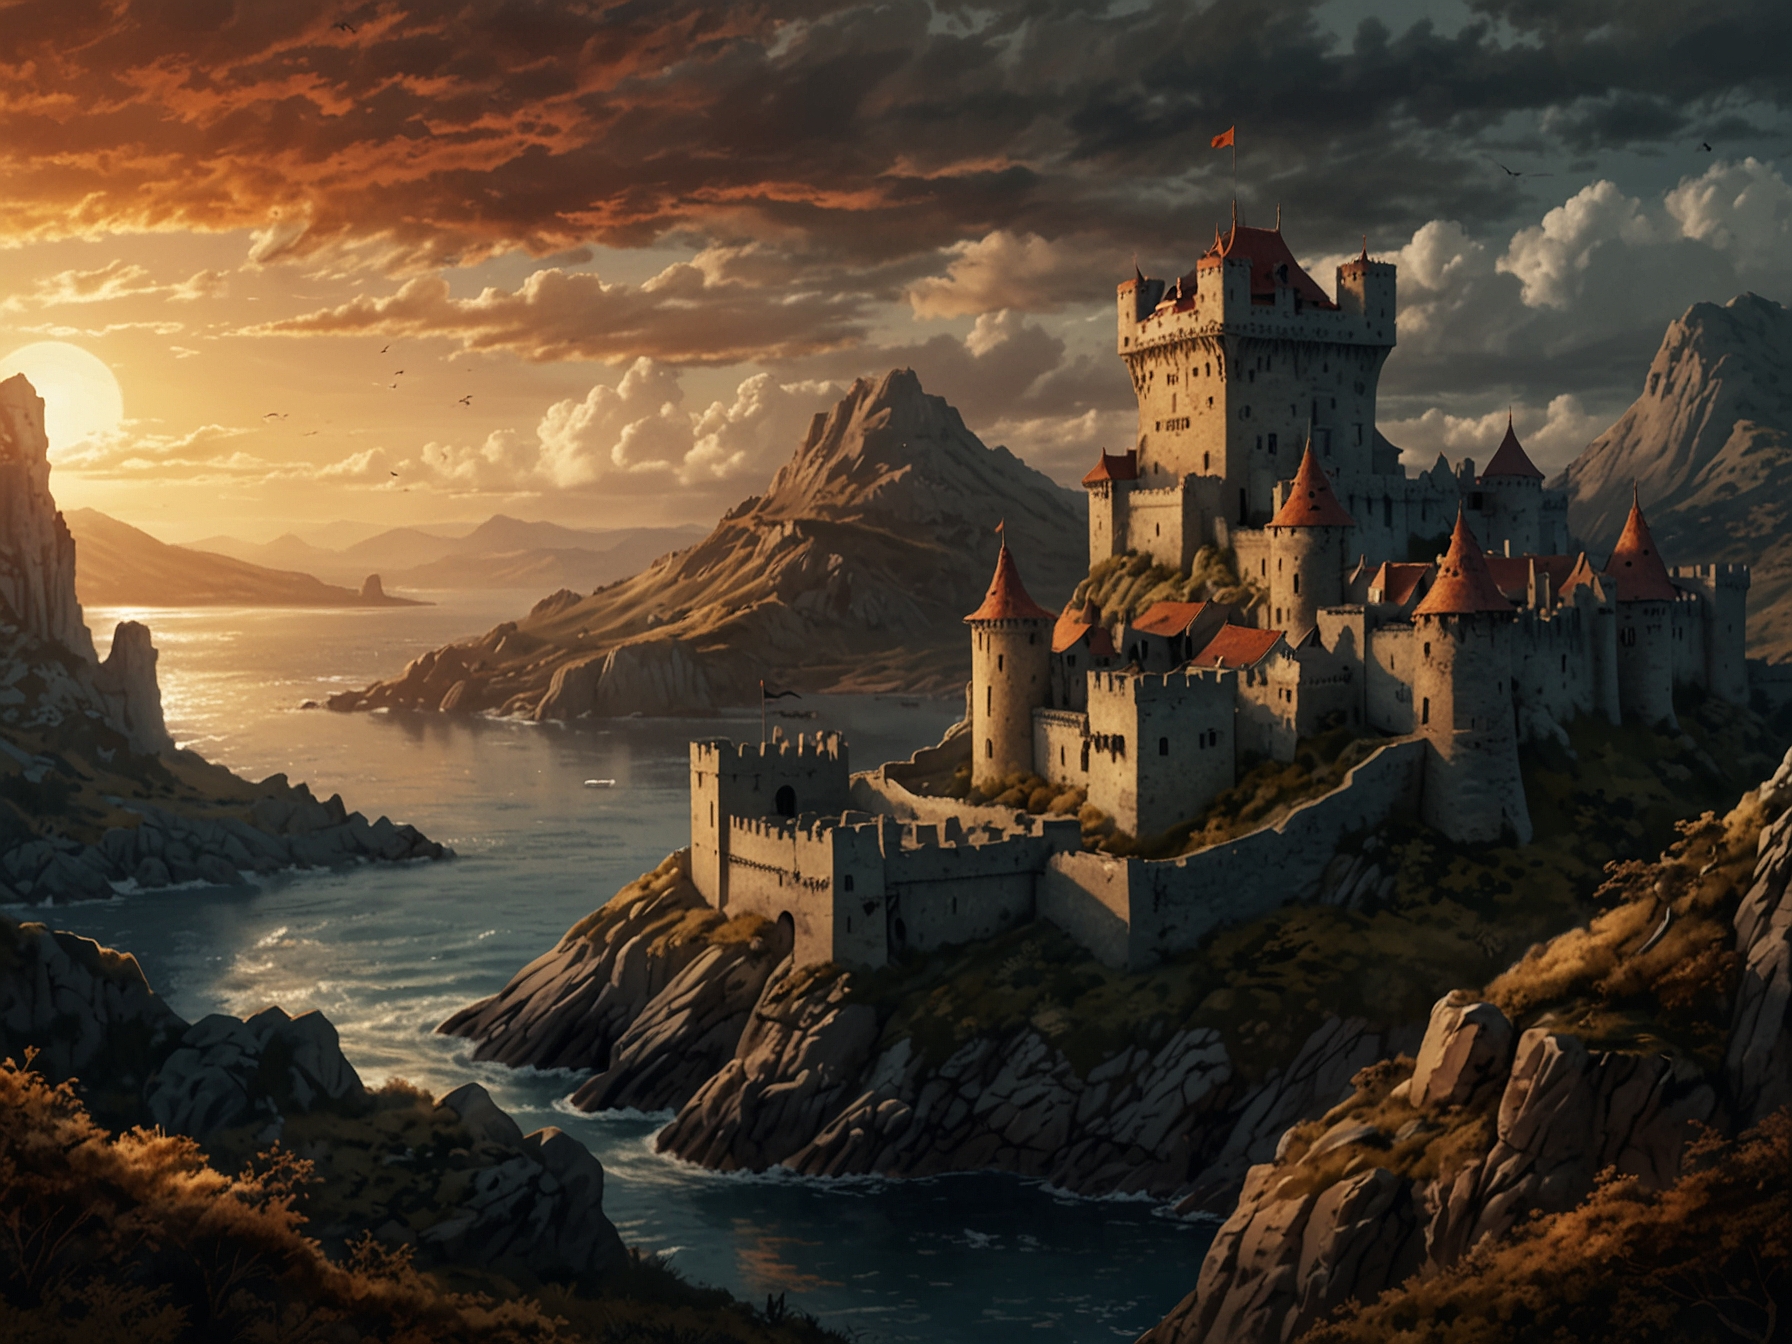 Artwork depicting House of the Dragon's Westerosi landscape, featuring King’s Landing in the background.